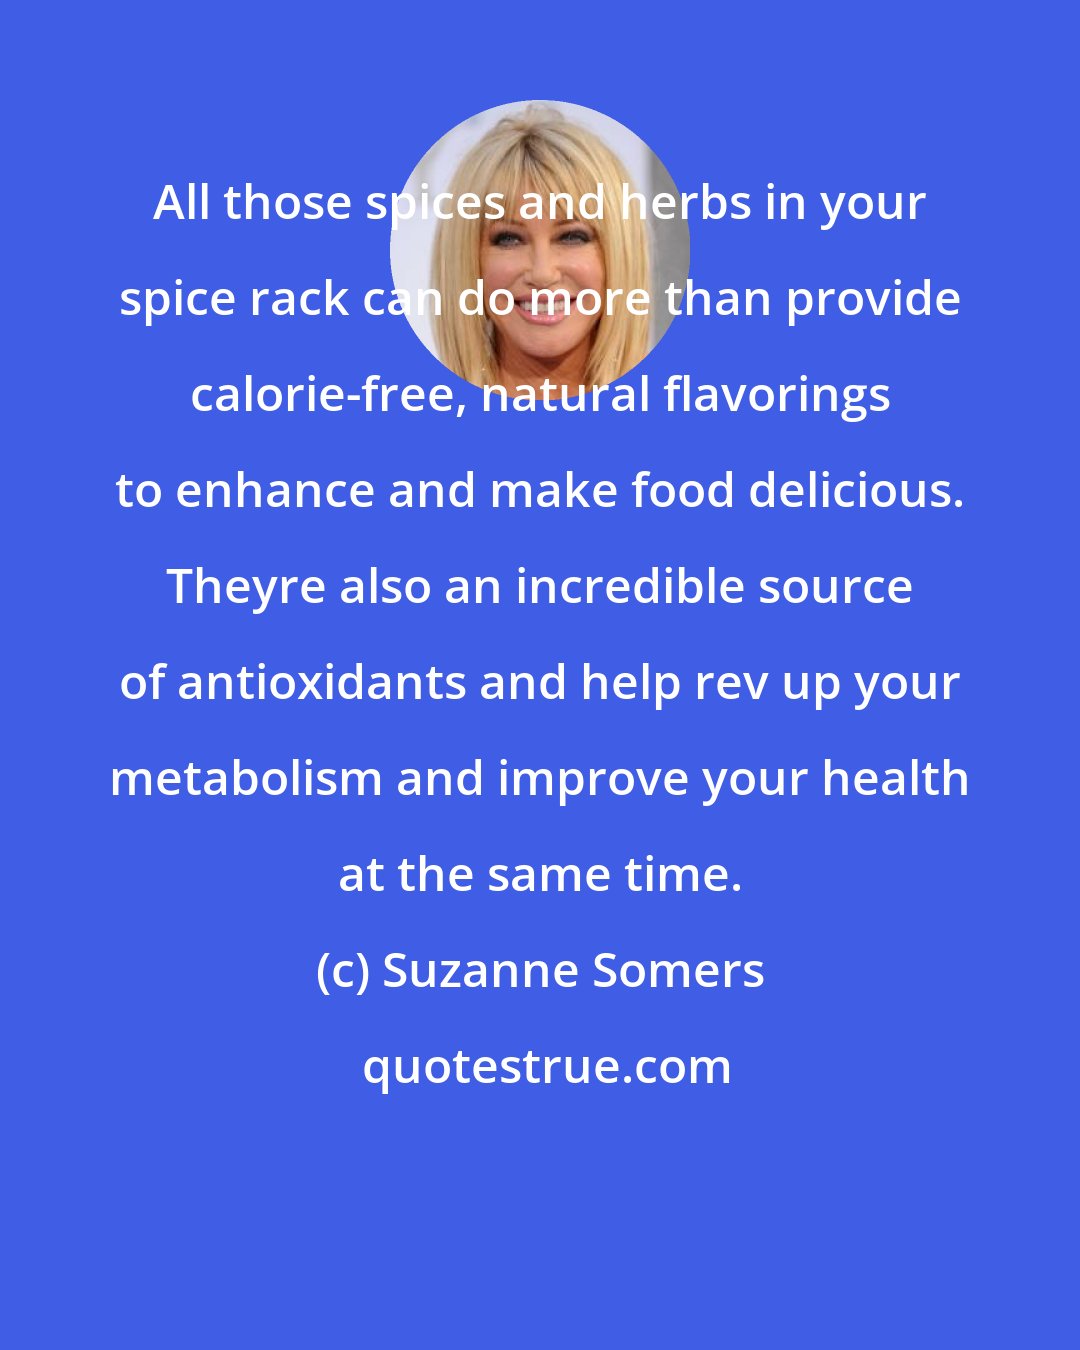 Suzanne Somers: All those spices and herbs in your spice rack can do more than provide calorie-free, natural flavorings to enhance and make food delicious. Theyre also an incredible source of antioxidants and help rev up your metabolism and improve your health at the same time.